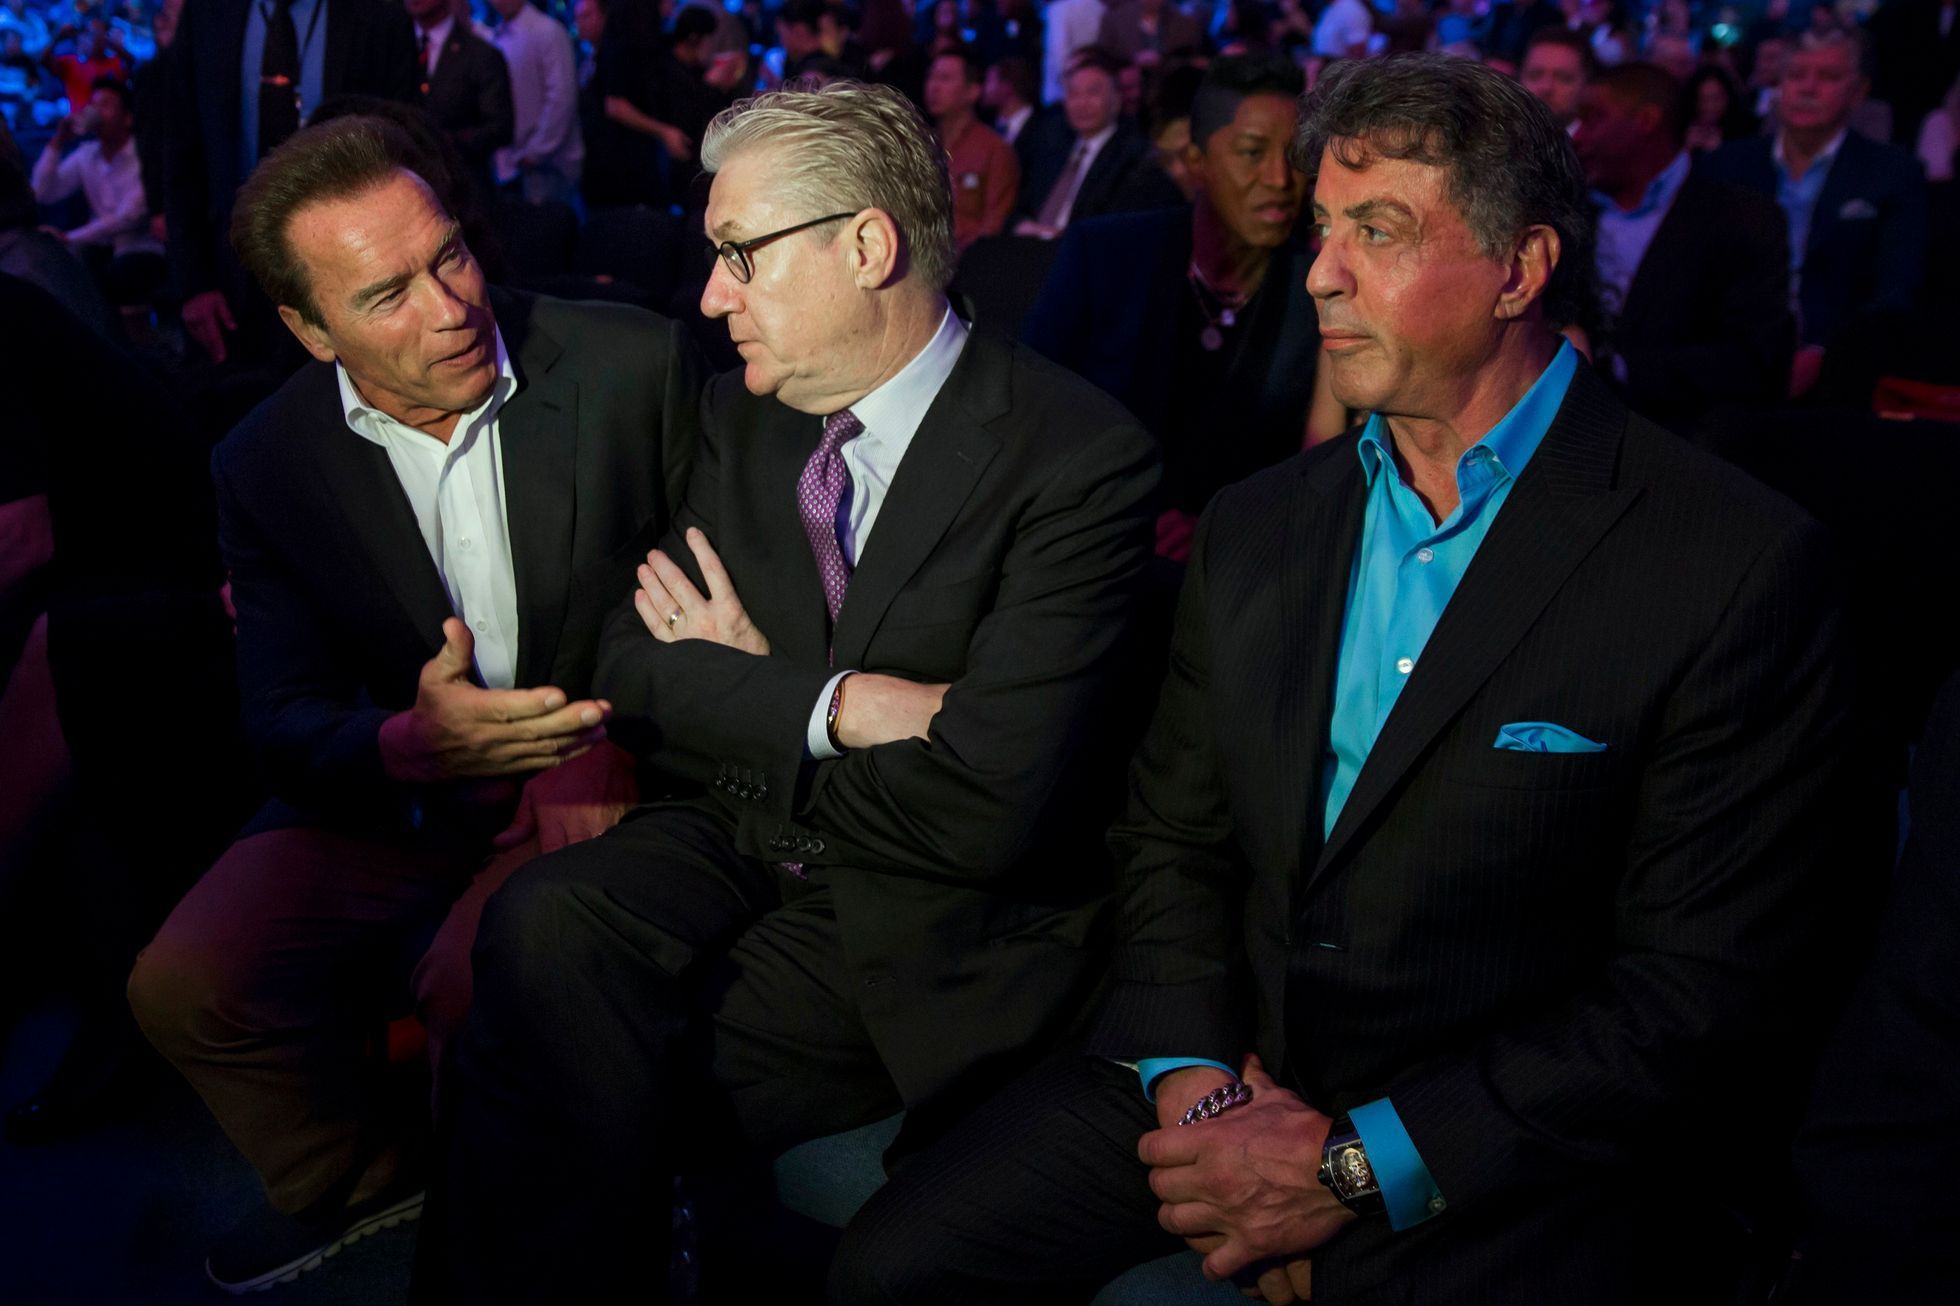 Schwarzenegger, Sands China CEO Tracy, and Stallone attend the WBO world welterweight title boxing match between Pacquiao and Chris Algieri in Macau